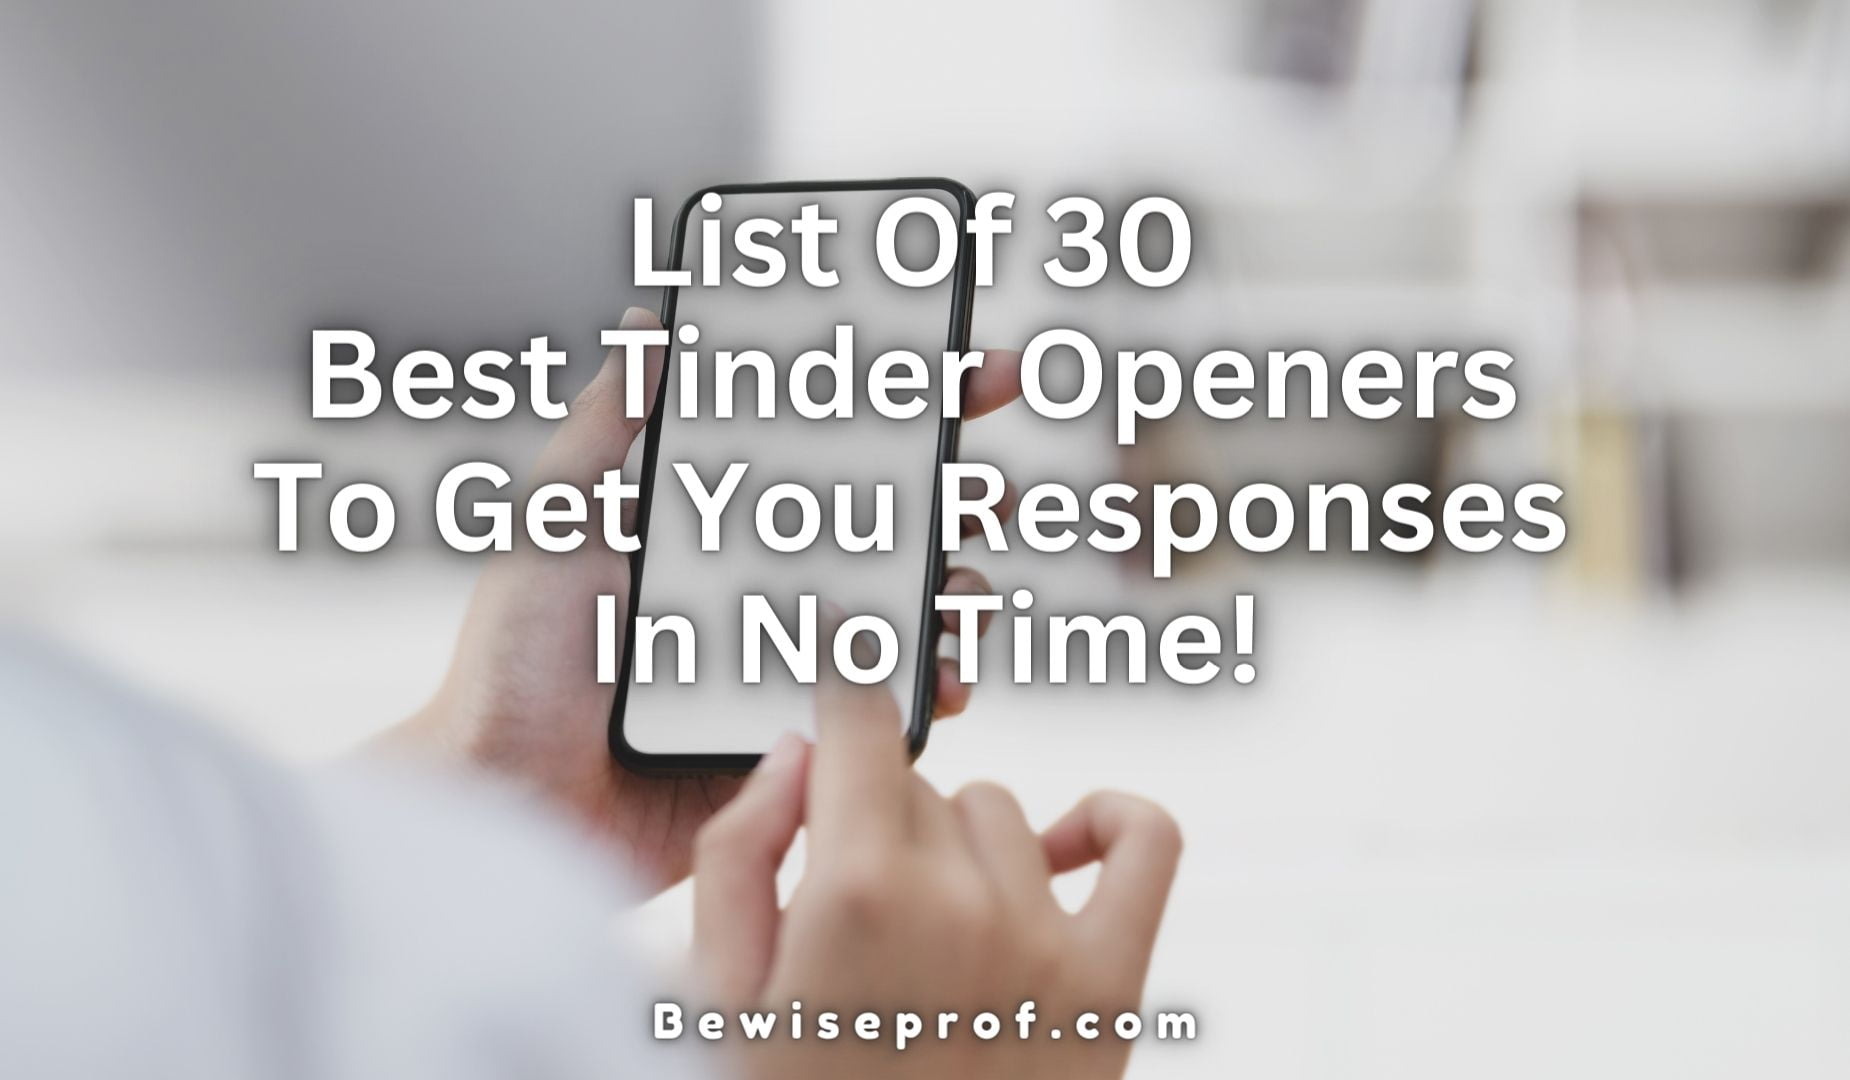 List Of 30 Best Tinder Openers To Get You Responses In No Time!